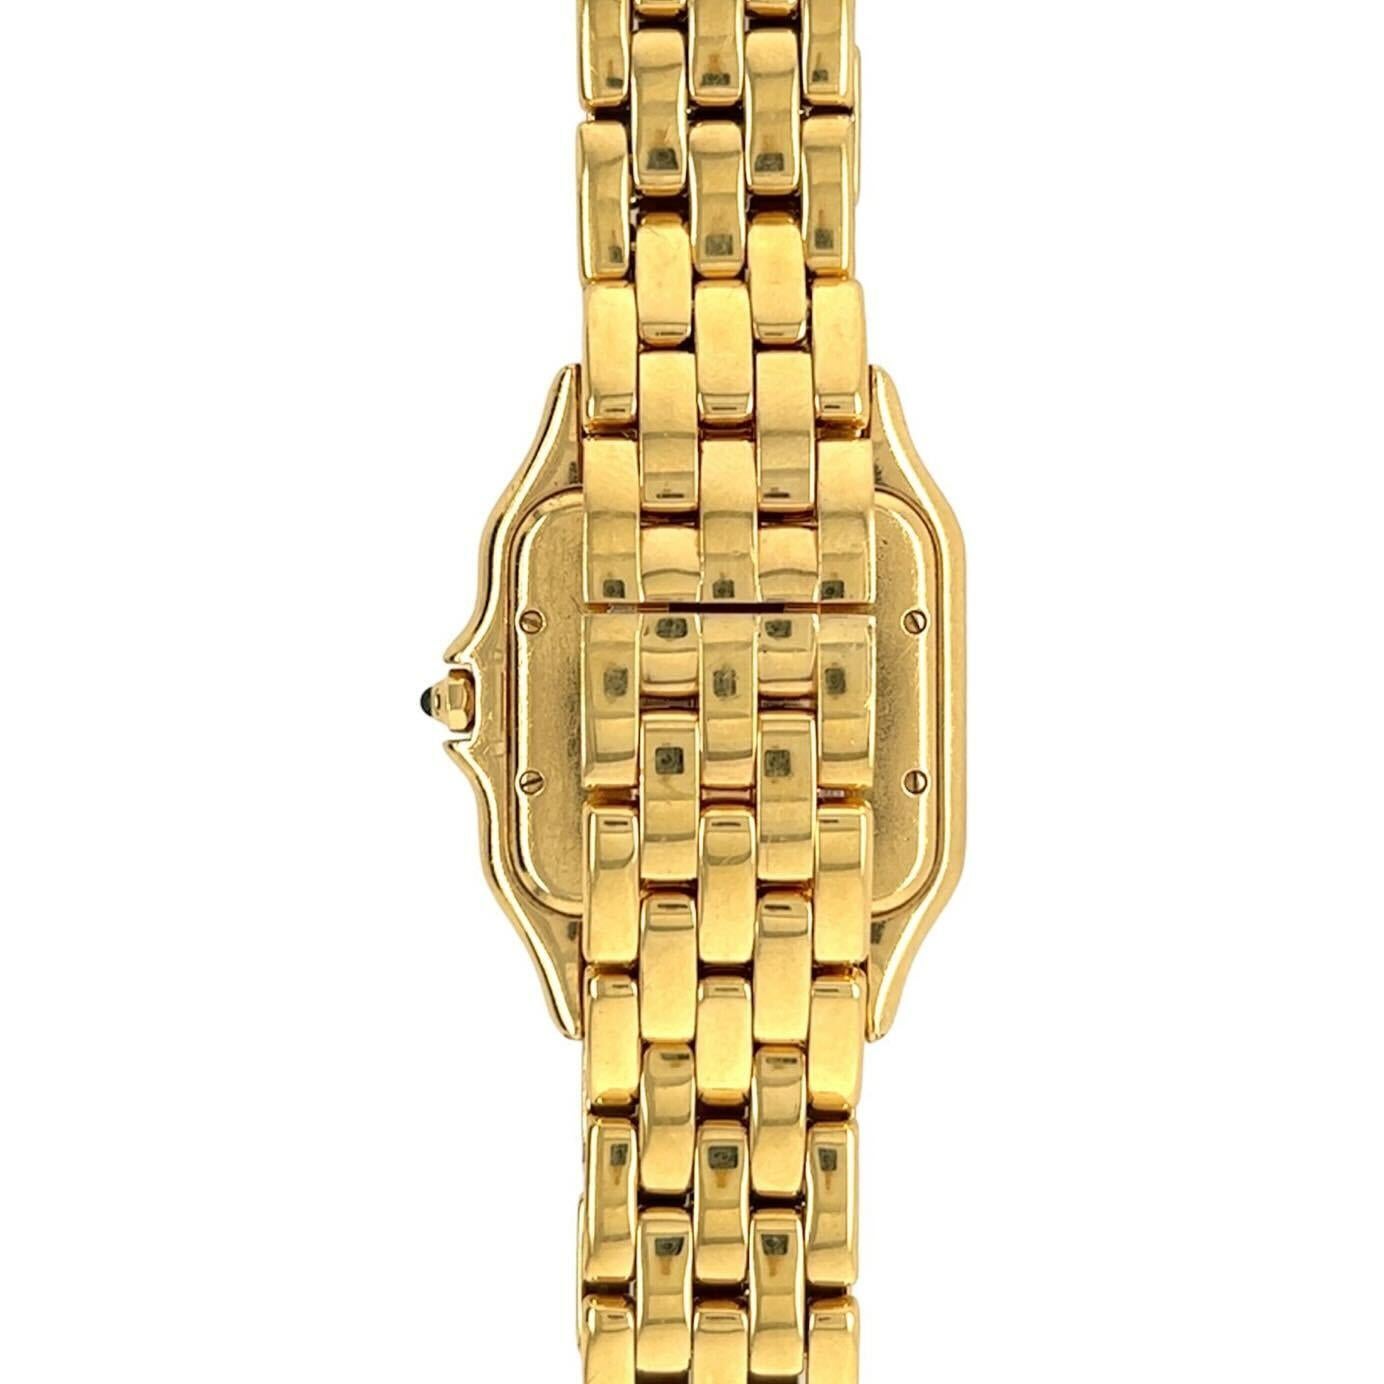 An 18 karat yellow gold watch, Cartier.  The Panthere de Cartier watch, quartz movement, crown set with a blue sapphire, square white dial with Roman numerals,, blued steel sword shaped hands, date aperture at 3, secret signature at 7, completed by